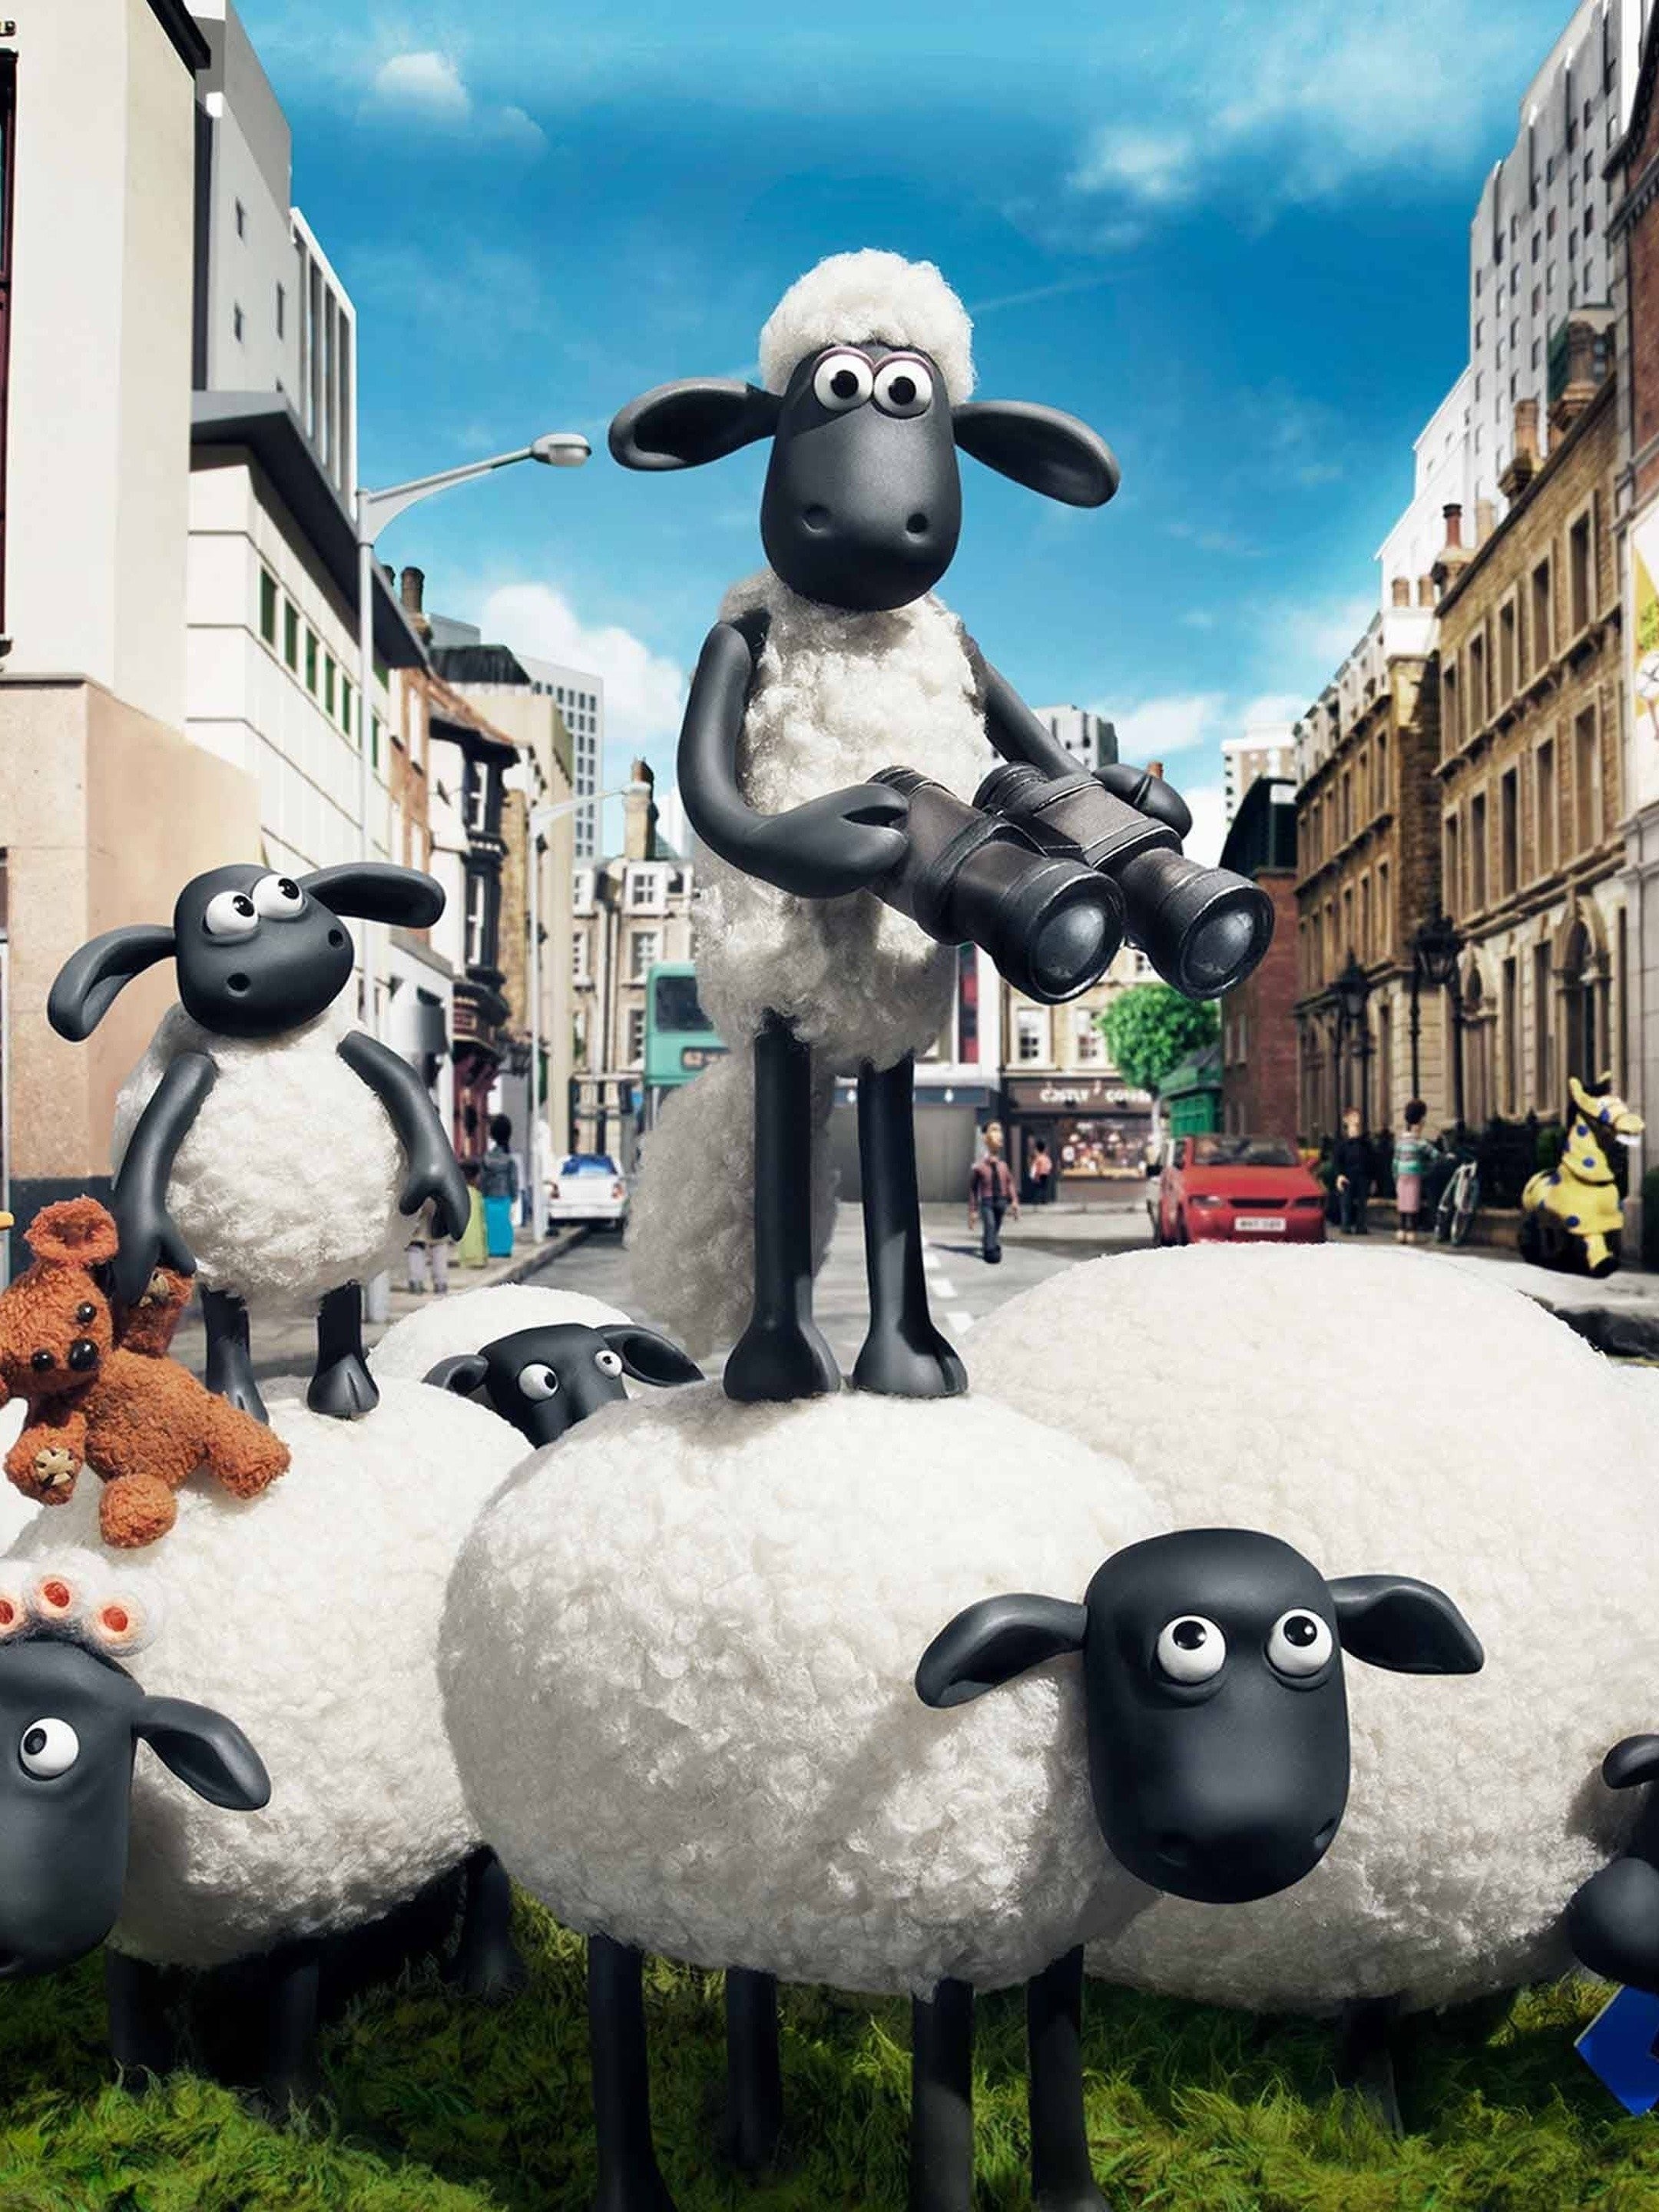 Review: 'Shaun the Sheep Movie' full of classic claymation, thin plot